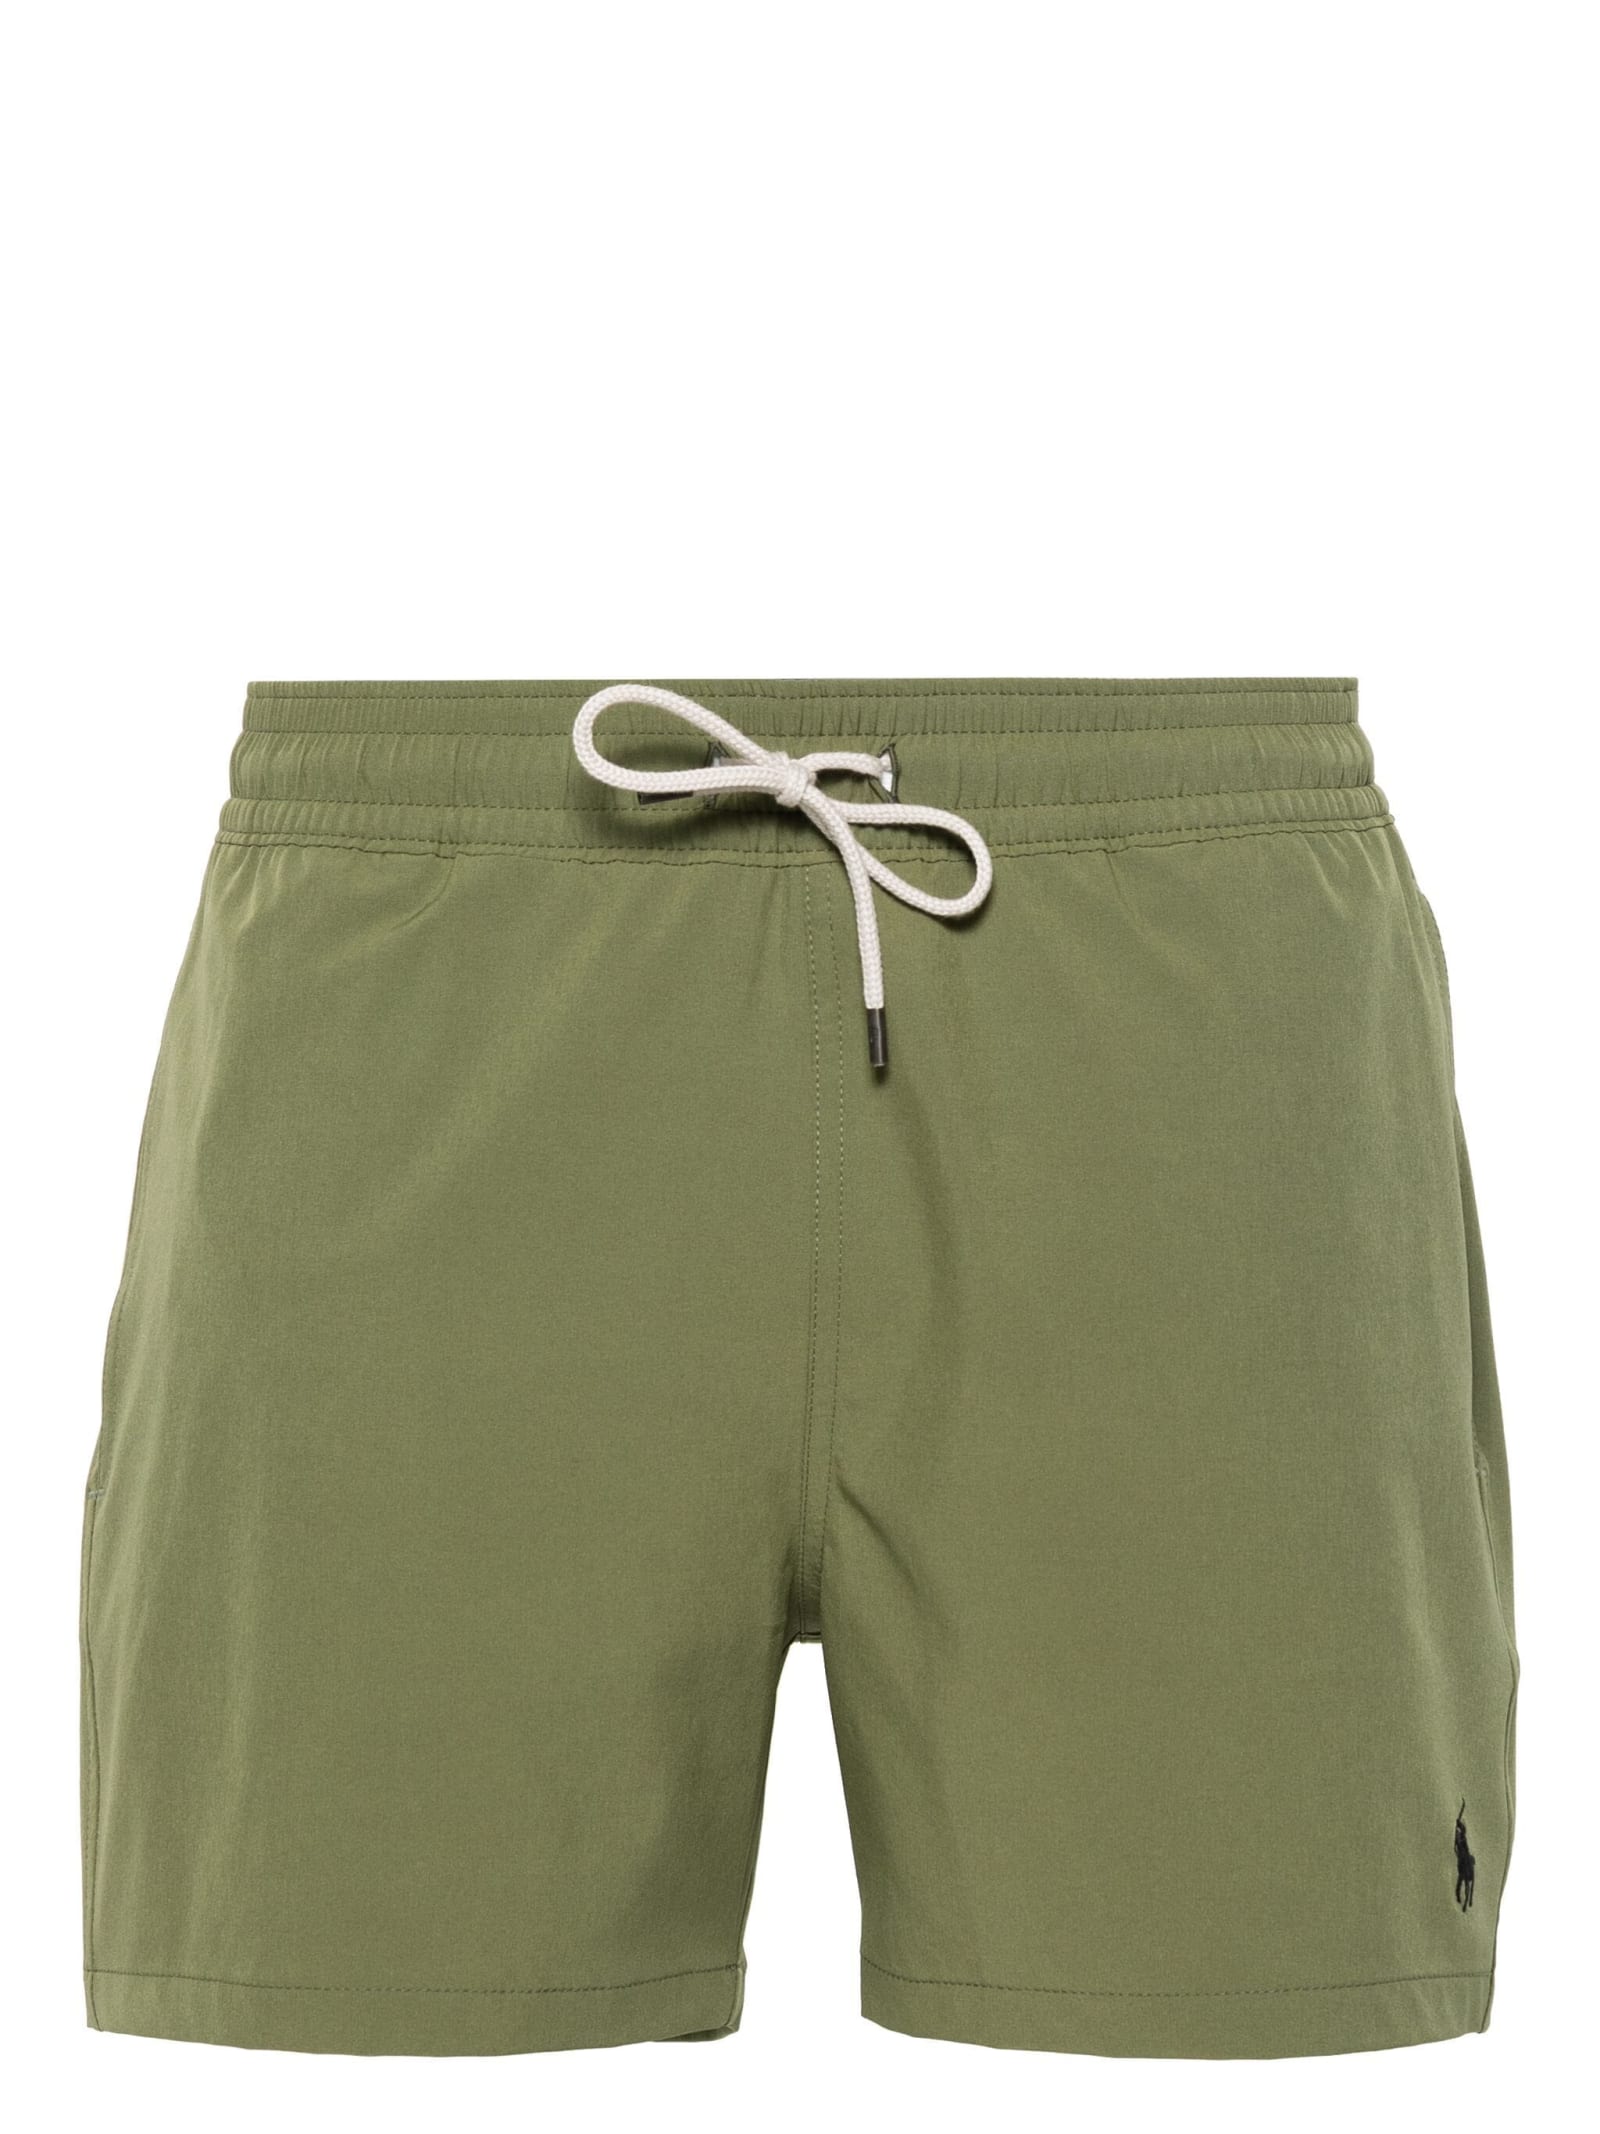 Ralph Lauren Olive Green Swim Shorts With Embroidered Pony